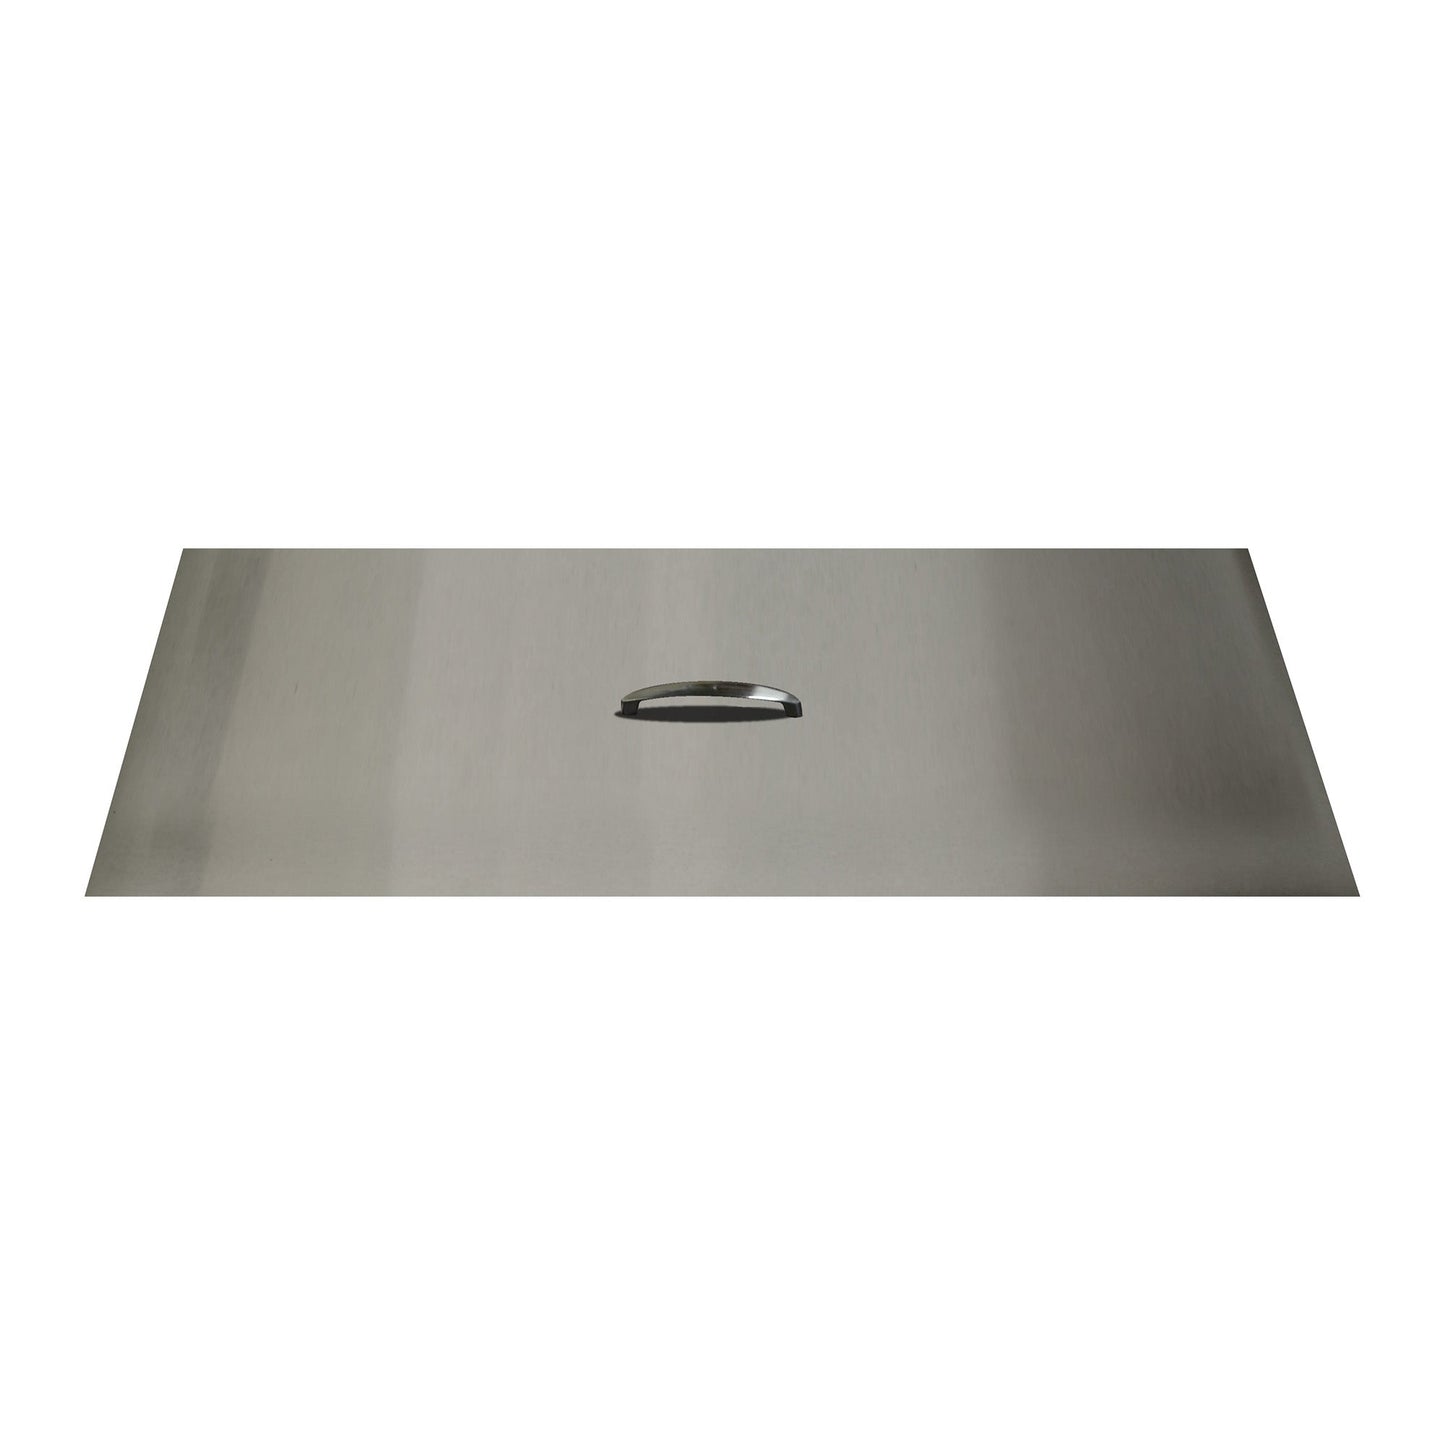 The Outdoor Plus 10" x 64" Stainless Steel Rectangular Fire Pit Lid Cover